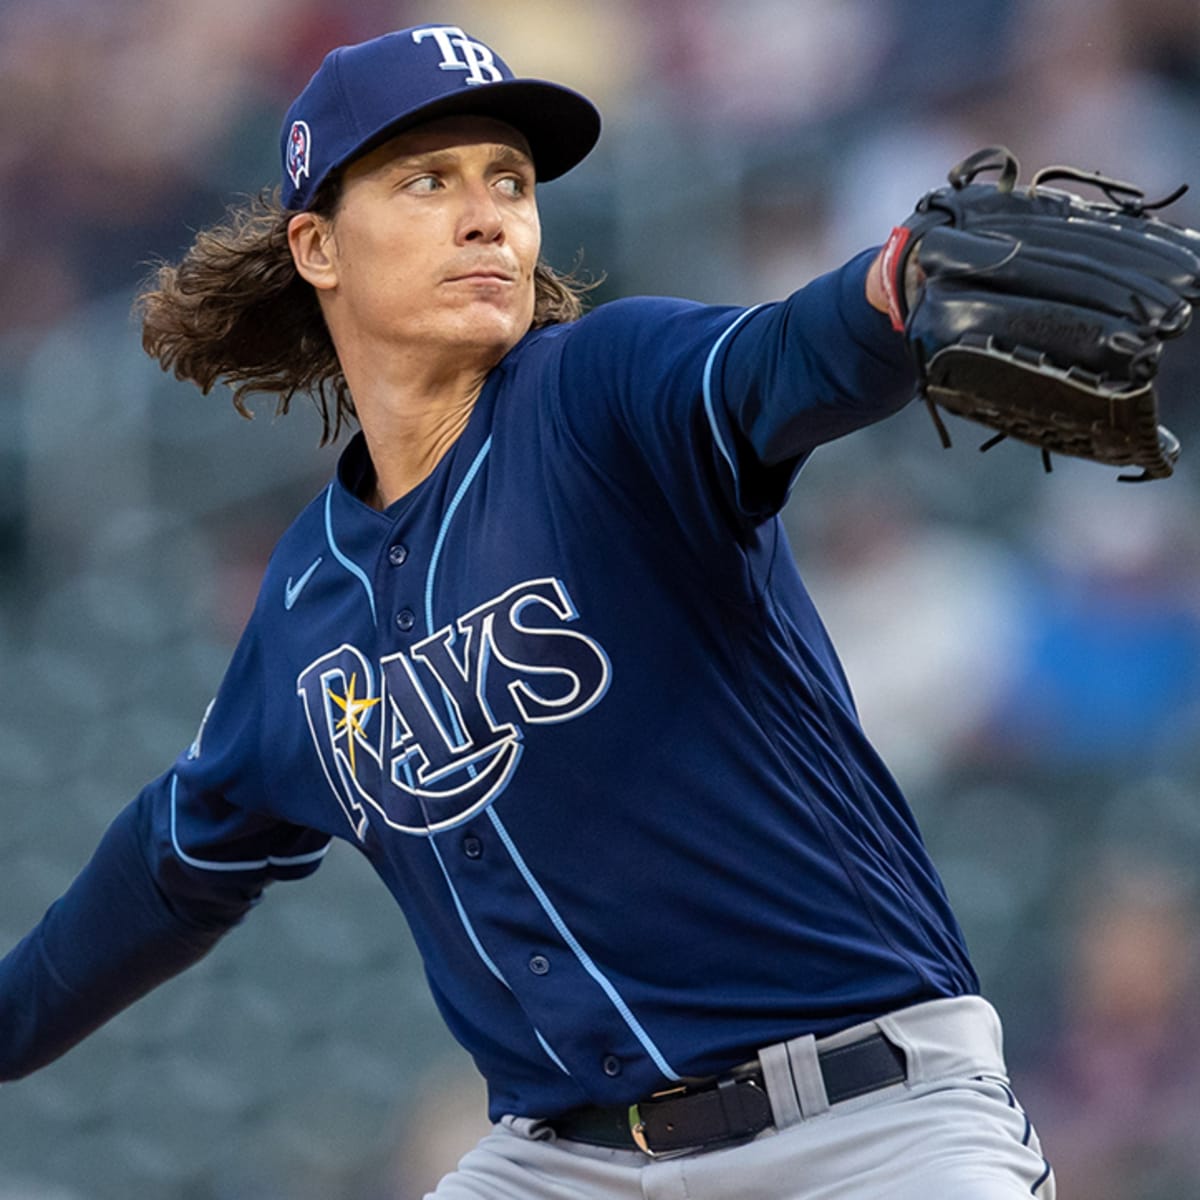 Cillian Murphy responds to fans who say Rays pitcher Tyler Glasnow